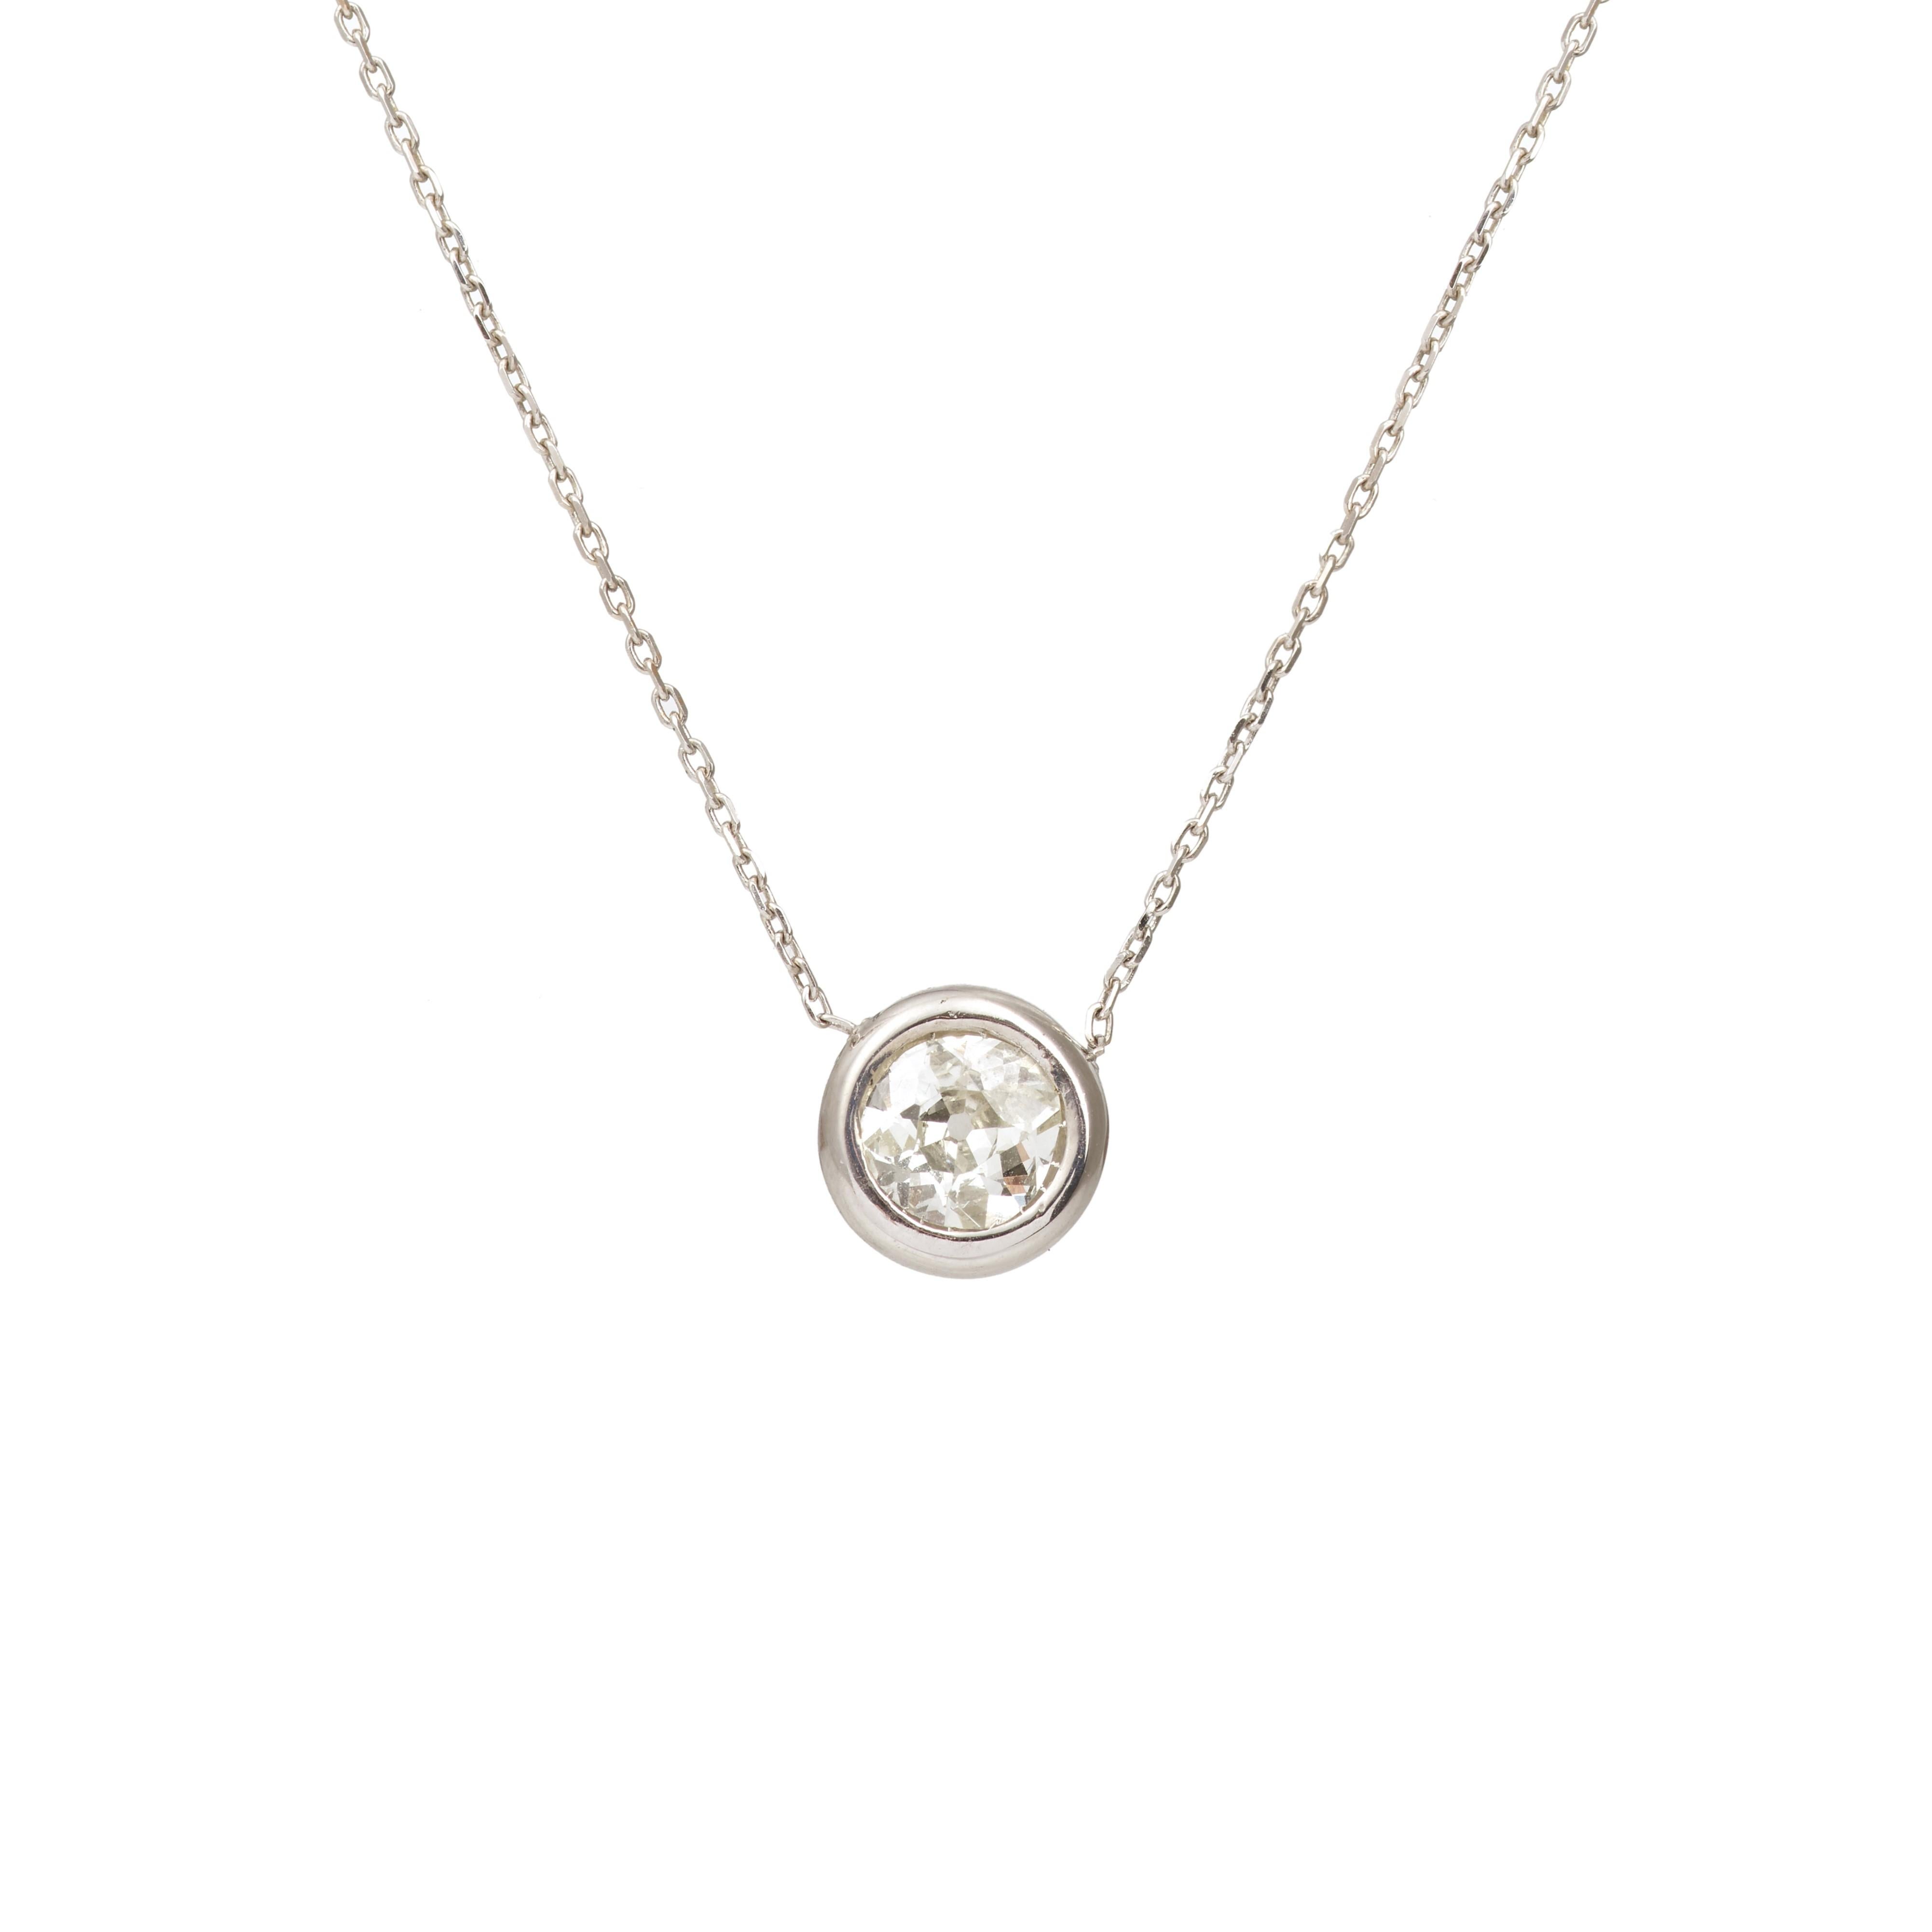 Pendant necklace in white gold with an old-cut diamond in a tire setting.

Estimated diamond weight: 1 carat

Estimated colour: I-J

Estimated clarity: SI

Necklace length: Adjustable between three rings at 42, 45 and 48 cm (16.53, 17.71 or 18.89